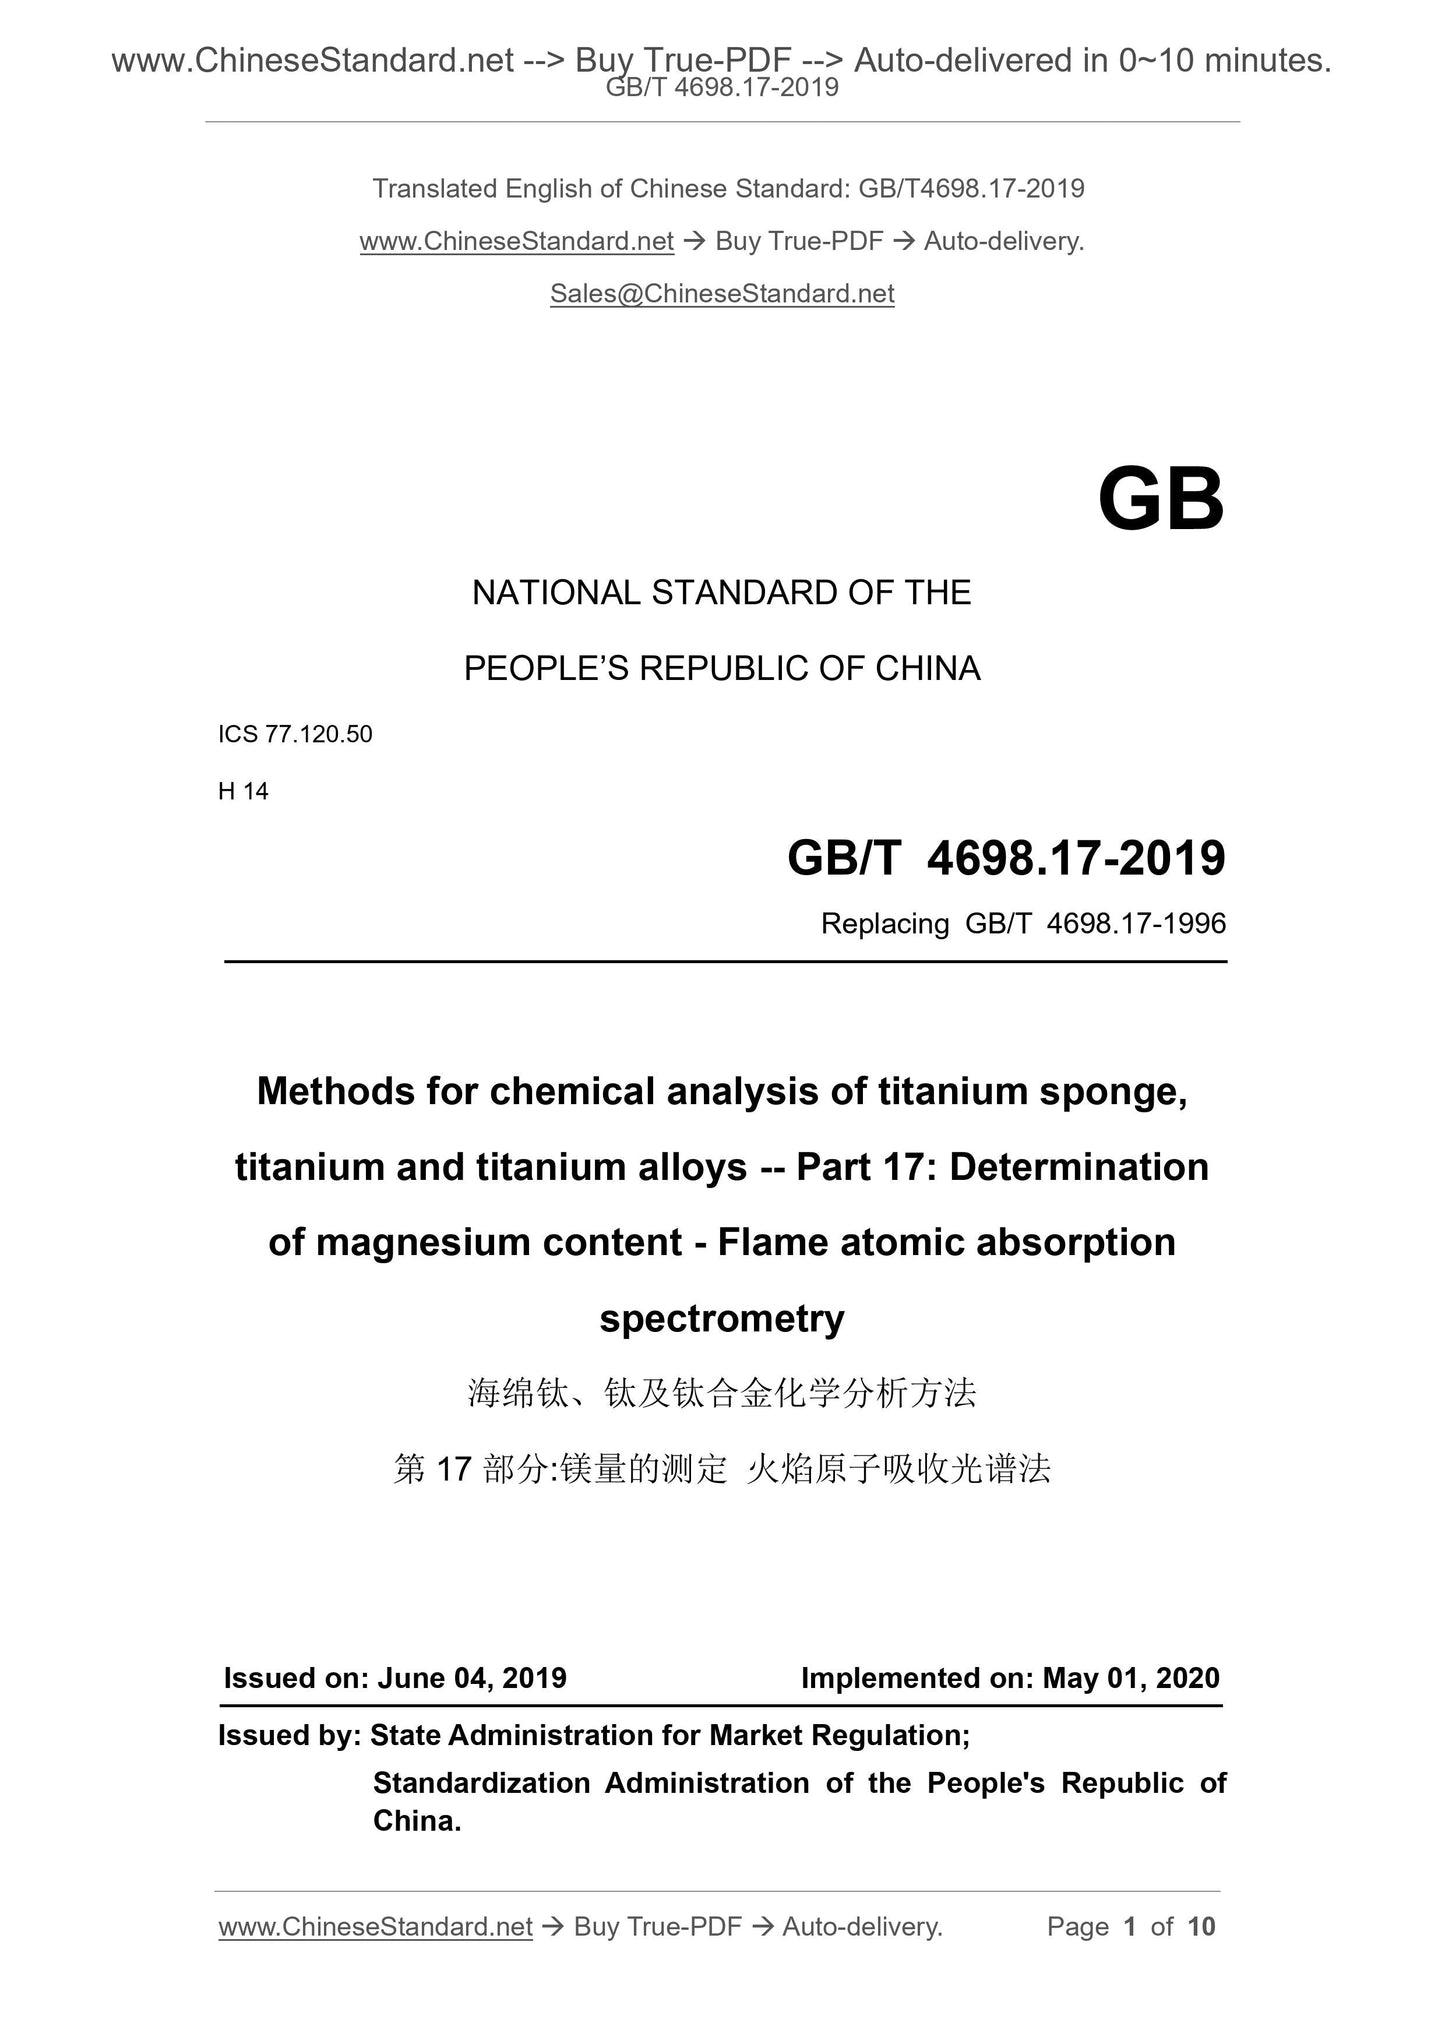 GB/T 4698.17-2019 Page 1